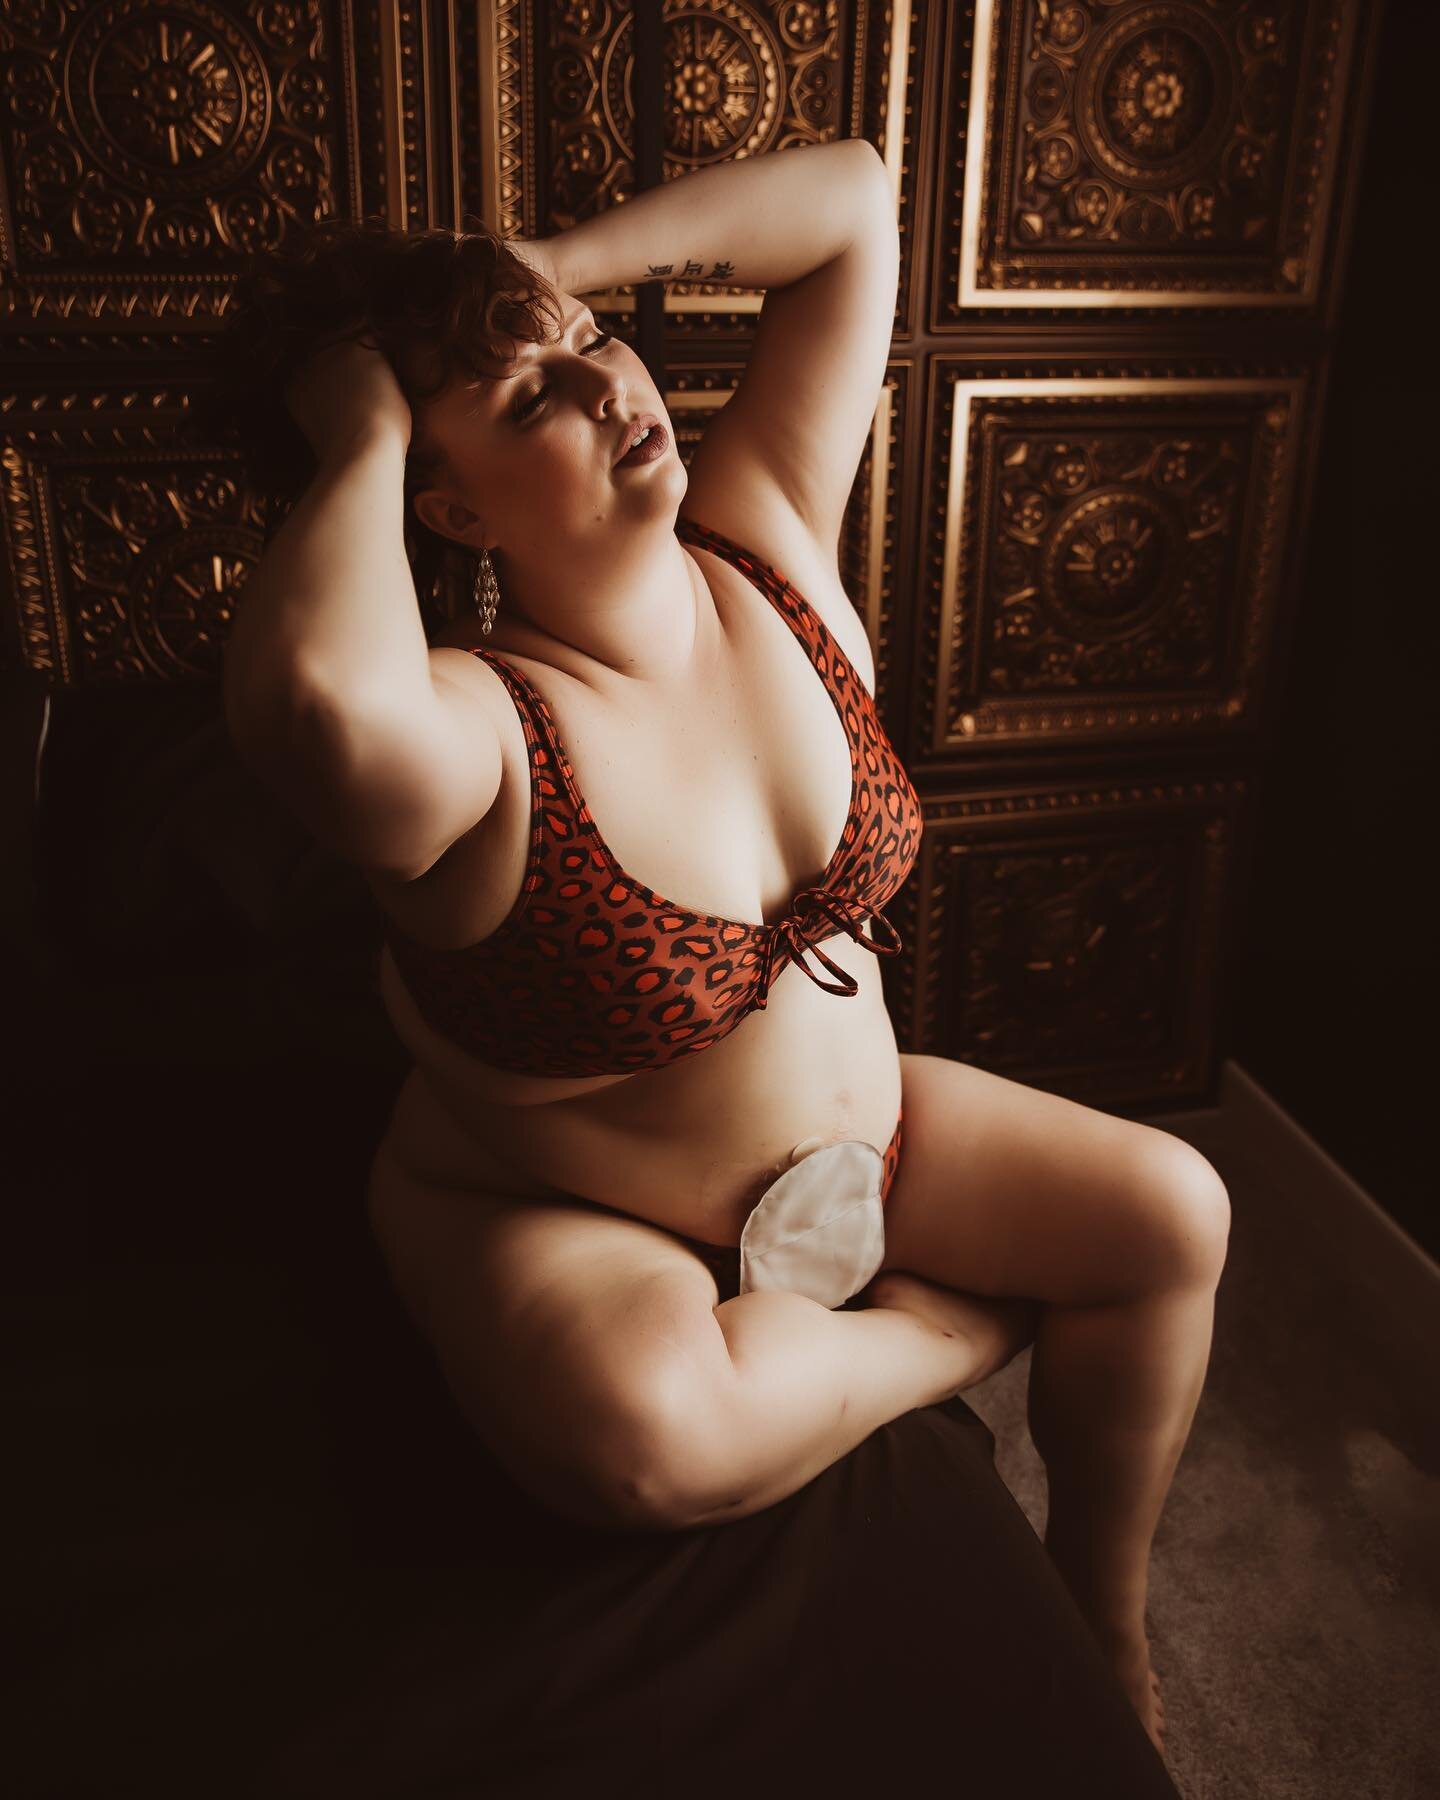 This babe brought a swimsuit for her session because she felt gooooood in it! I can&rsquo;t stress enough anything can be used for boudoir if you feel good in it. That will radiate through your images and is so much more important for the experience 